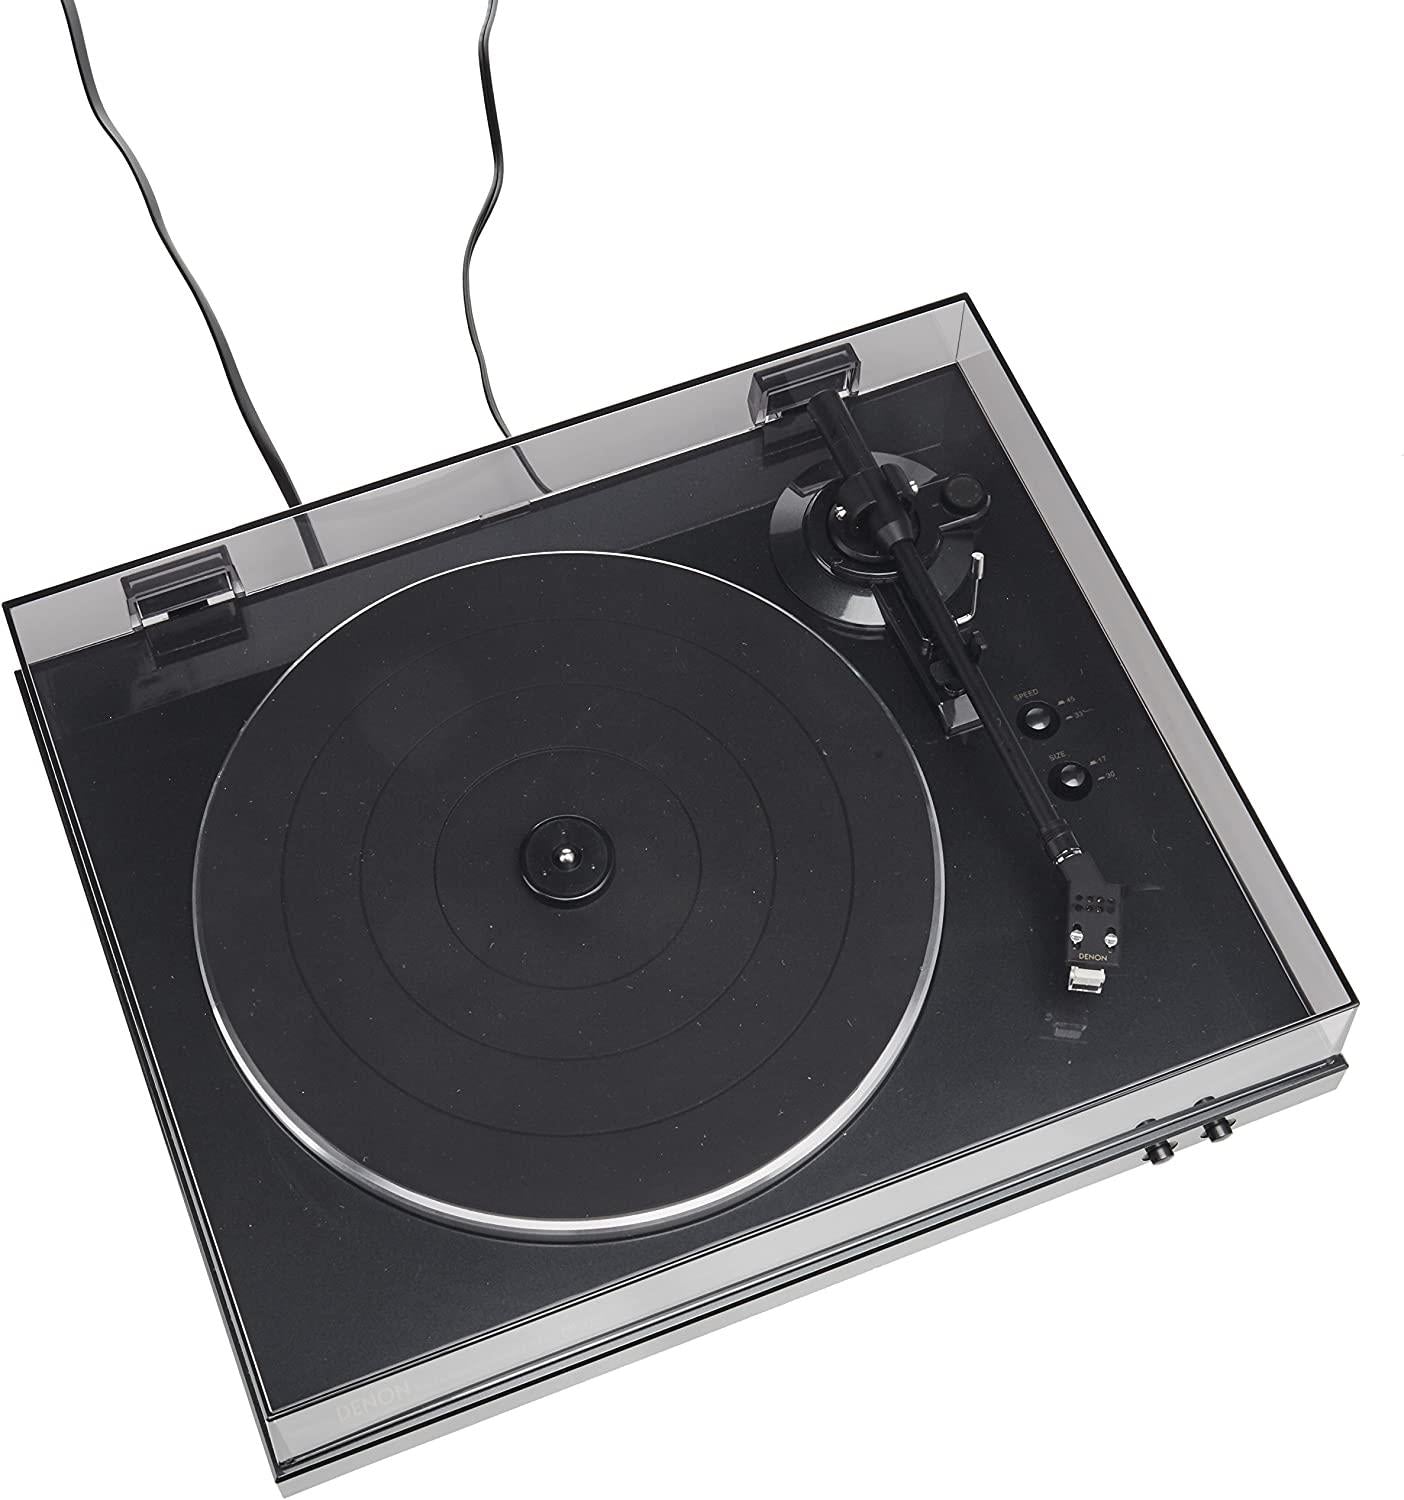 Denon DP-300F Fully Automatic Turntable | ListenUp